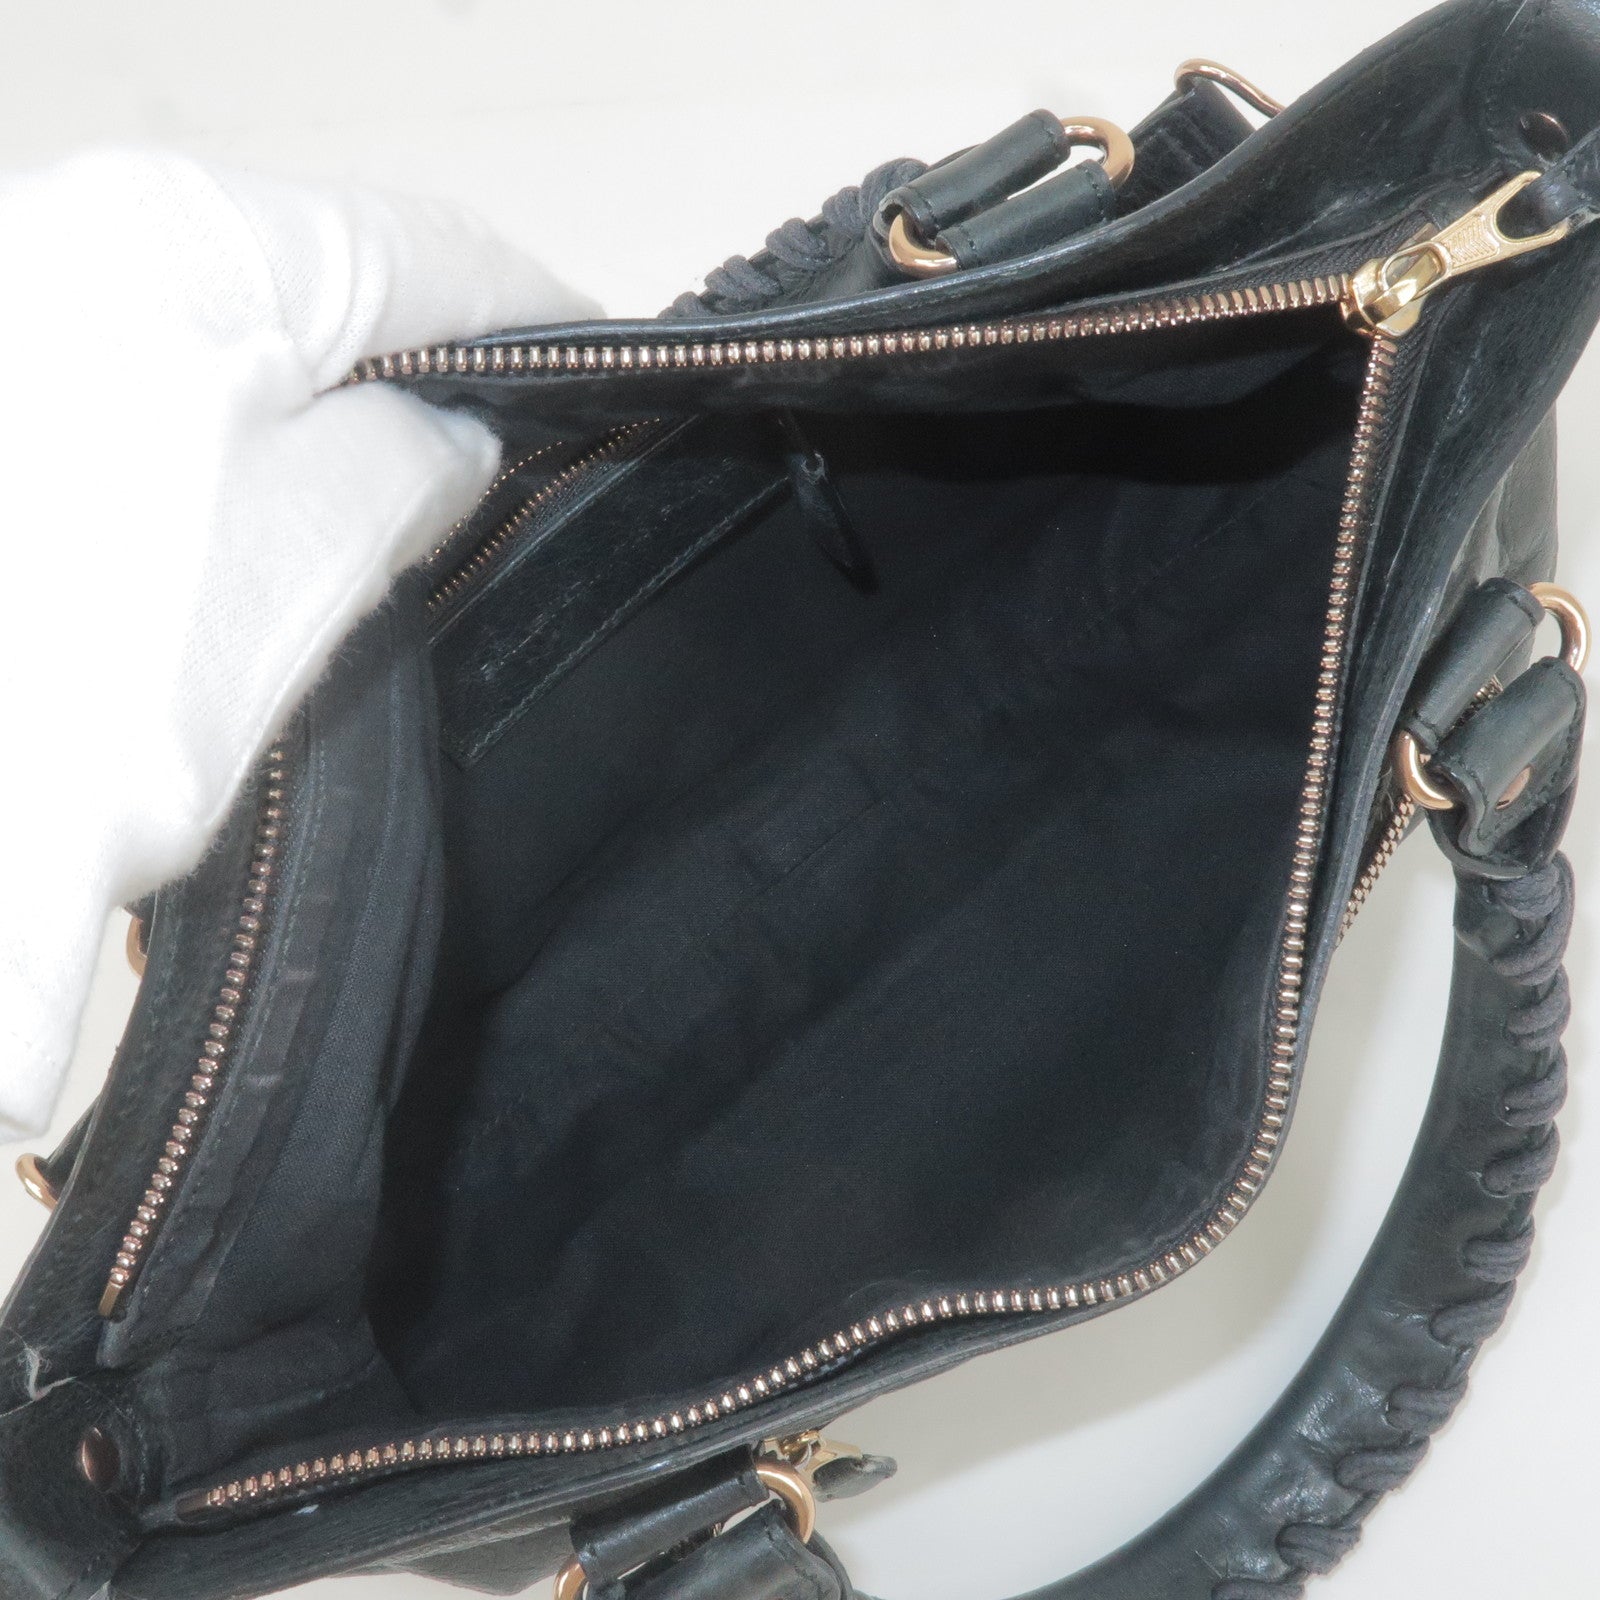 Pre-owned Louis Vuitton Black Patent Leather Applique Embellished